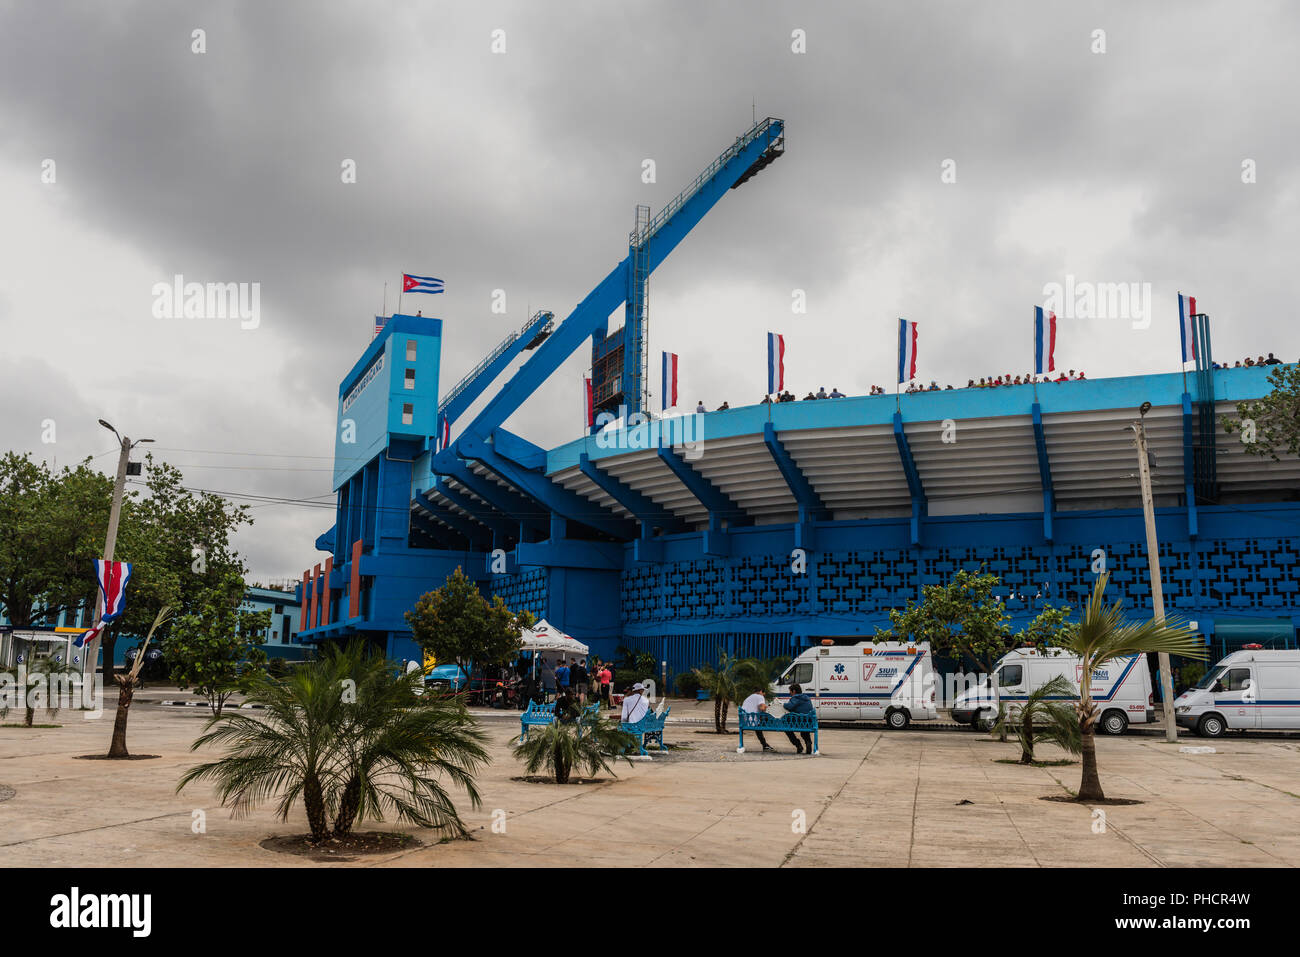 Main baseball stadium in Havana,Cuba where President Obama and Fidel Castro attended an exhibition game. Stock Photo